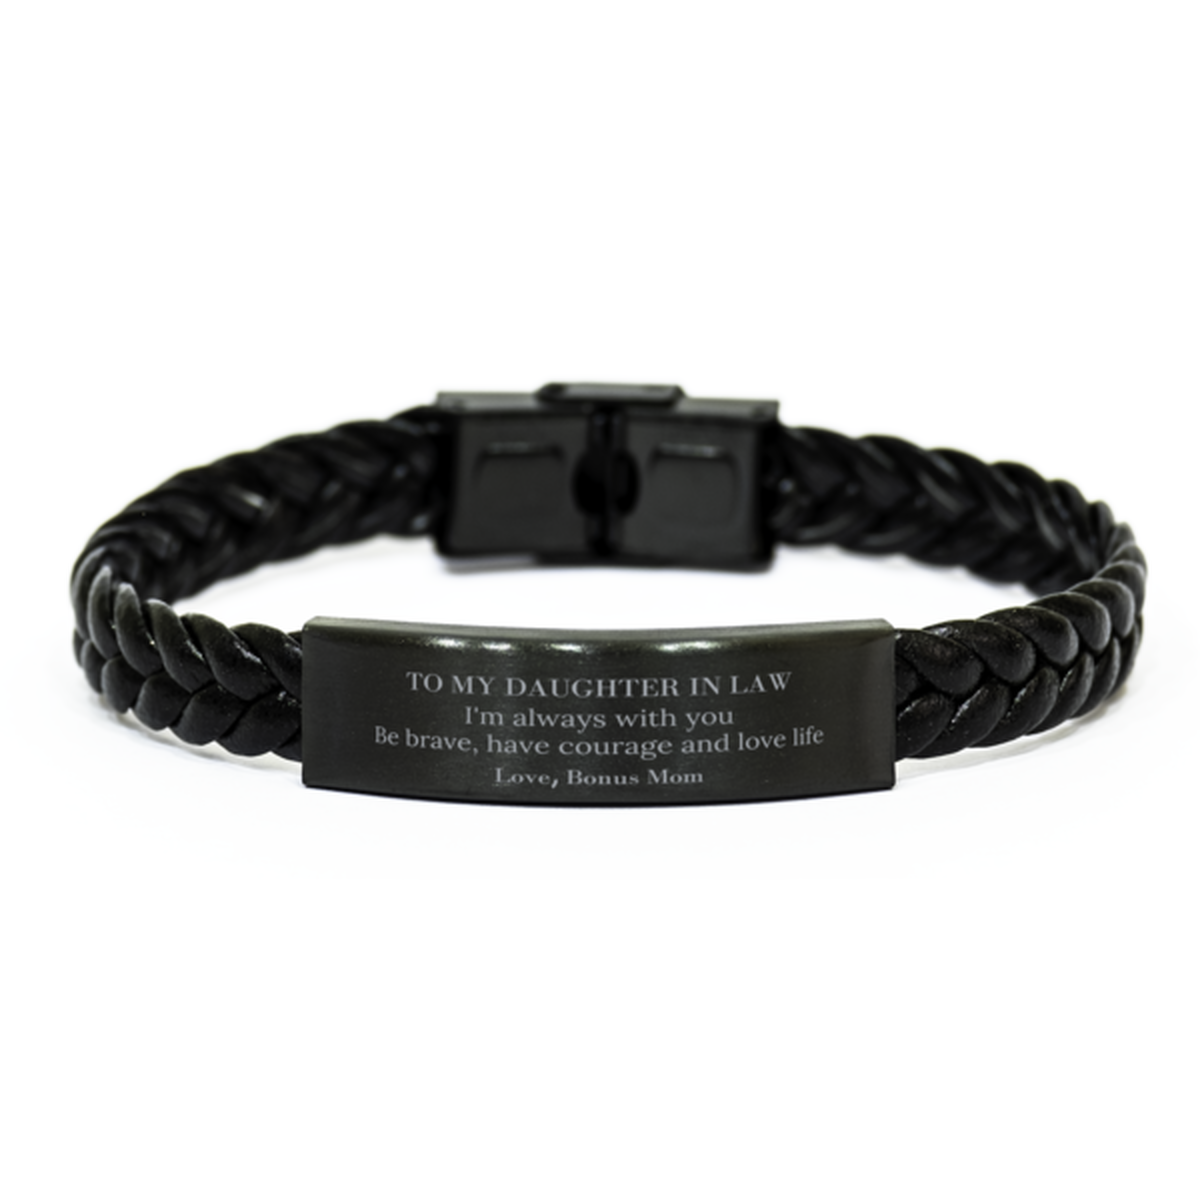 To My Daughter In Law Gifts from Bonus Mom, Unique Braided Leather Bracelet Inspirational Christmas Birthday Graduation Gifts for Daughter In Law I'm always with you. Be brave, have courage and love life. Love, Bonus Mom